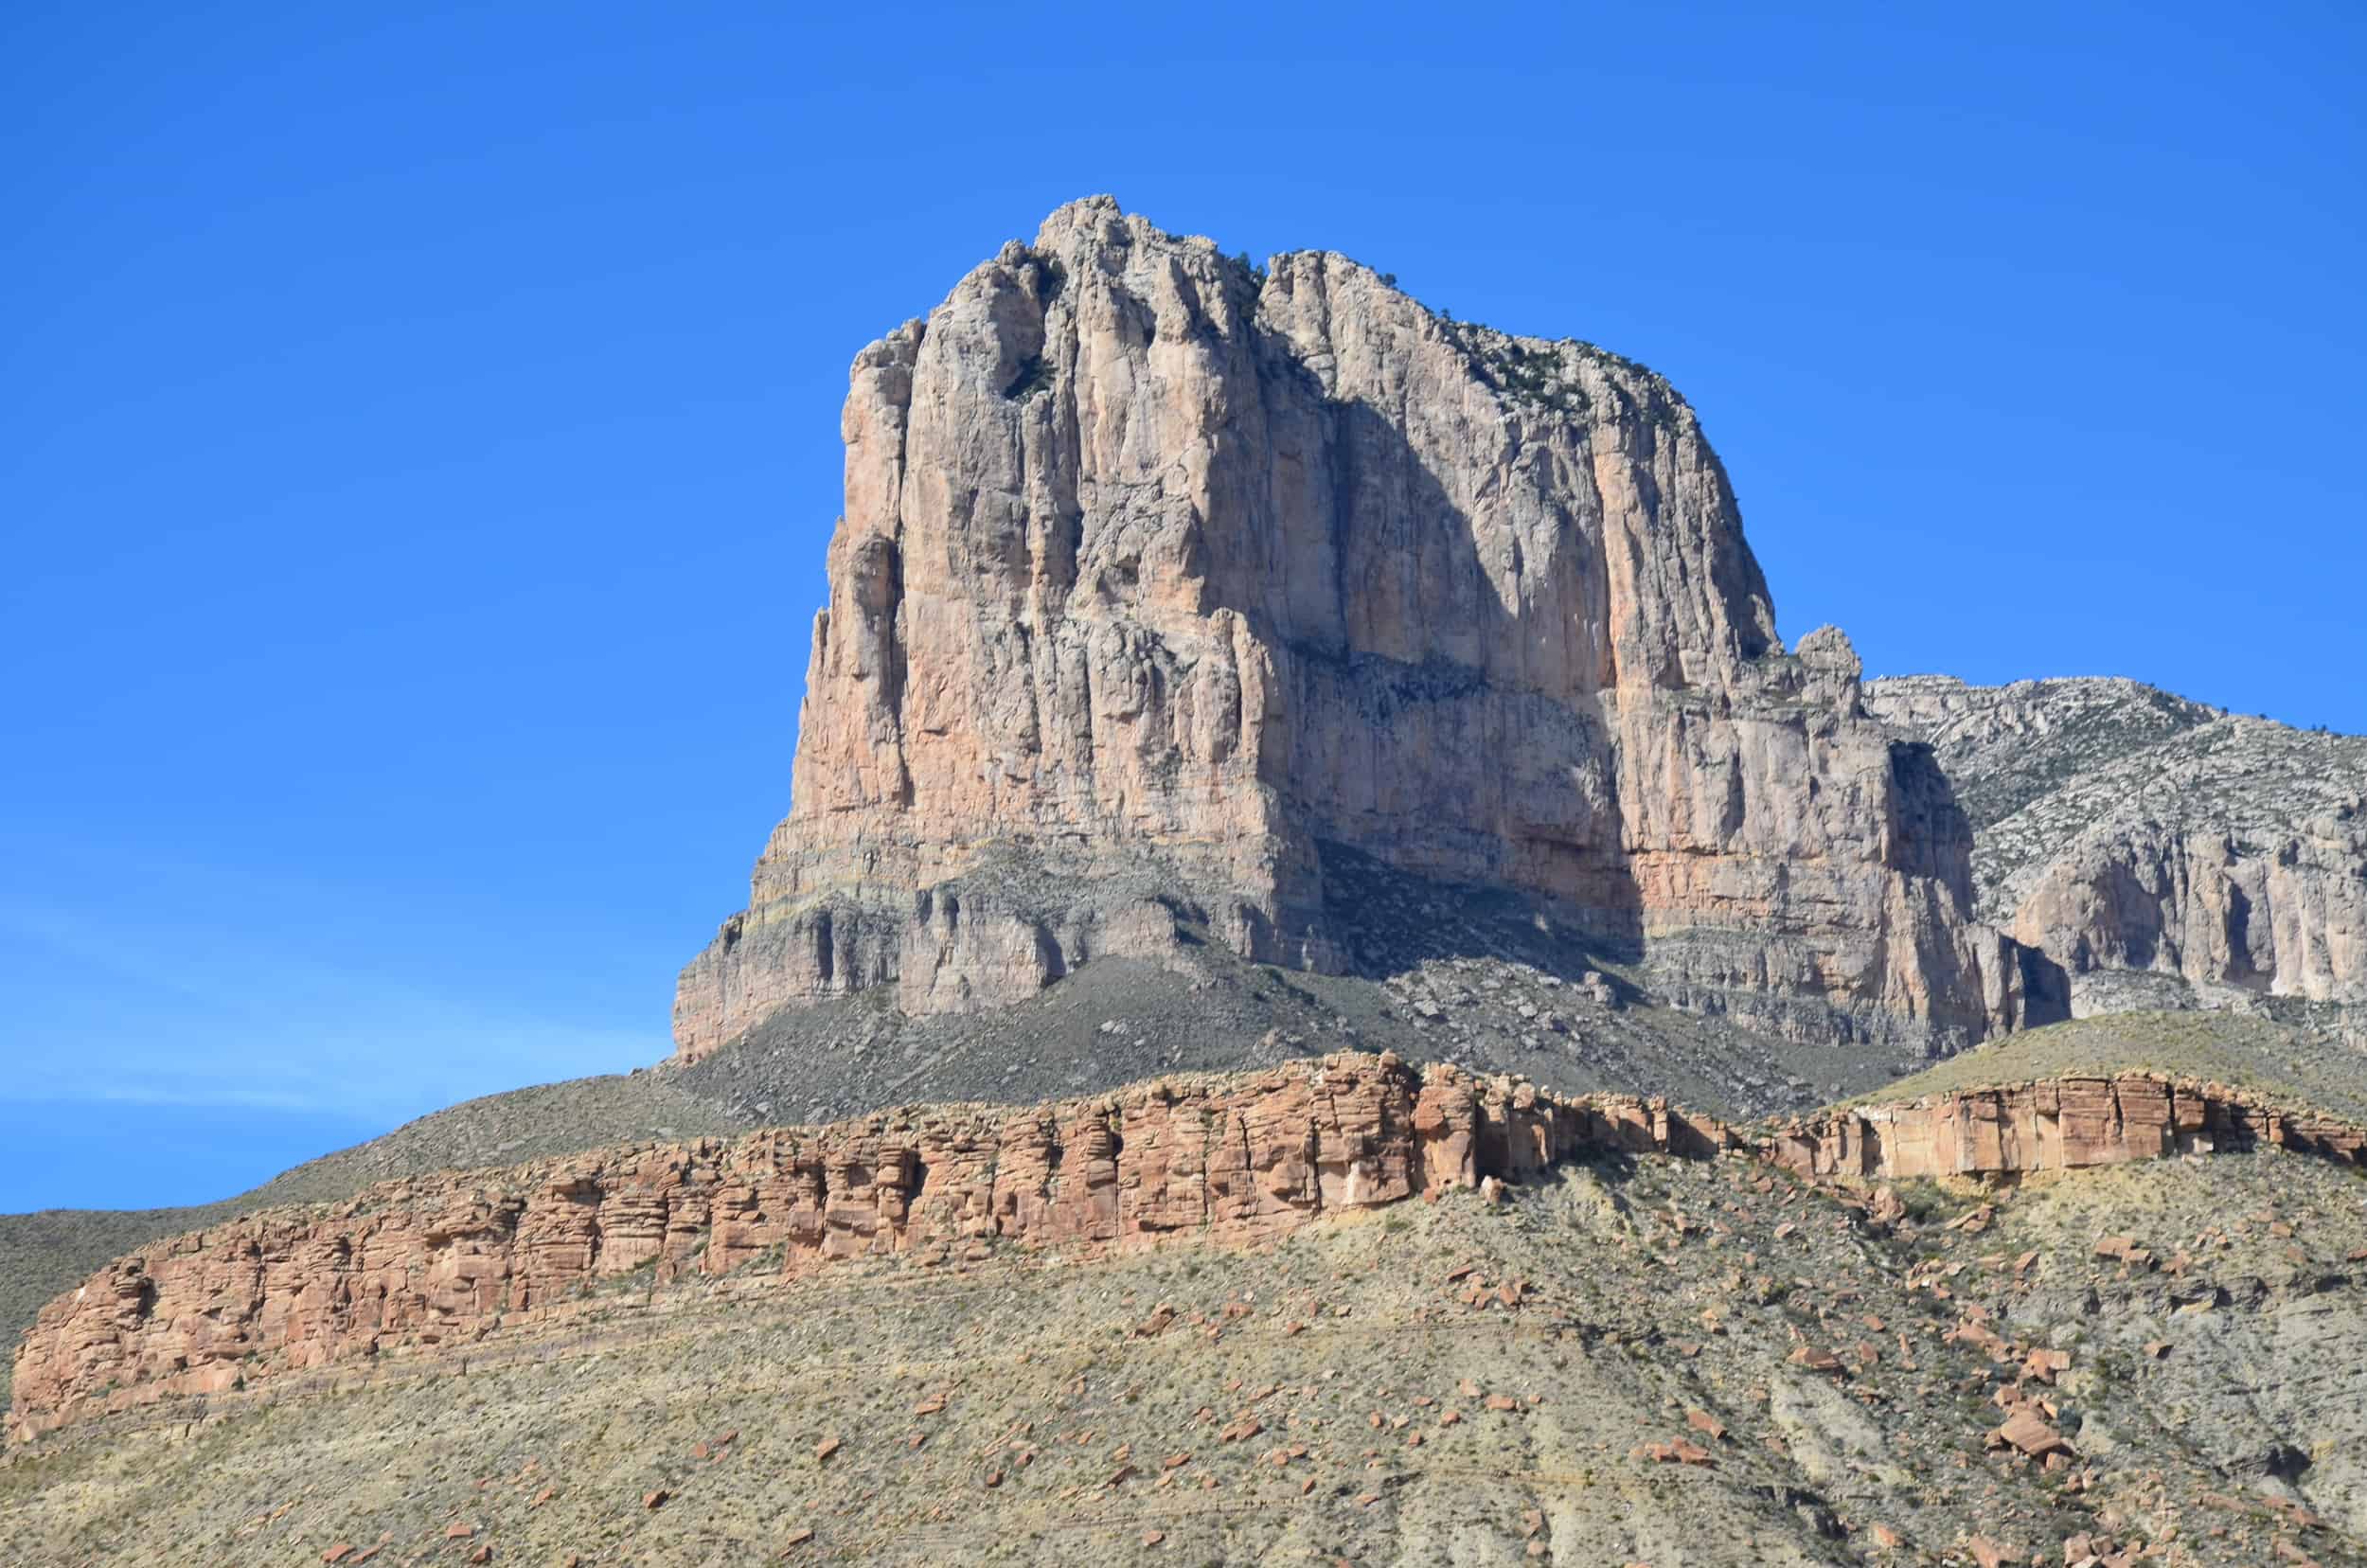 El Capitan at Guadalupe Mountains National Park in Texas